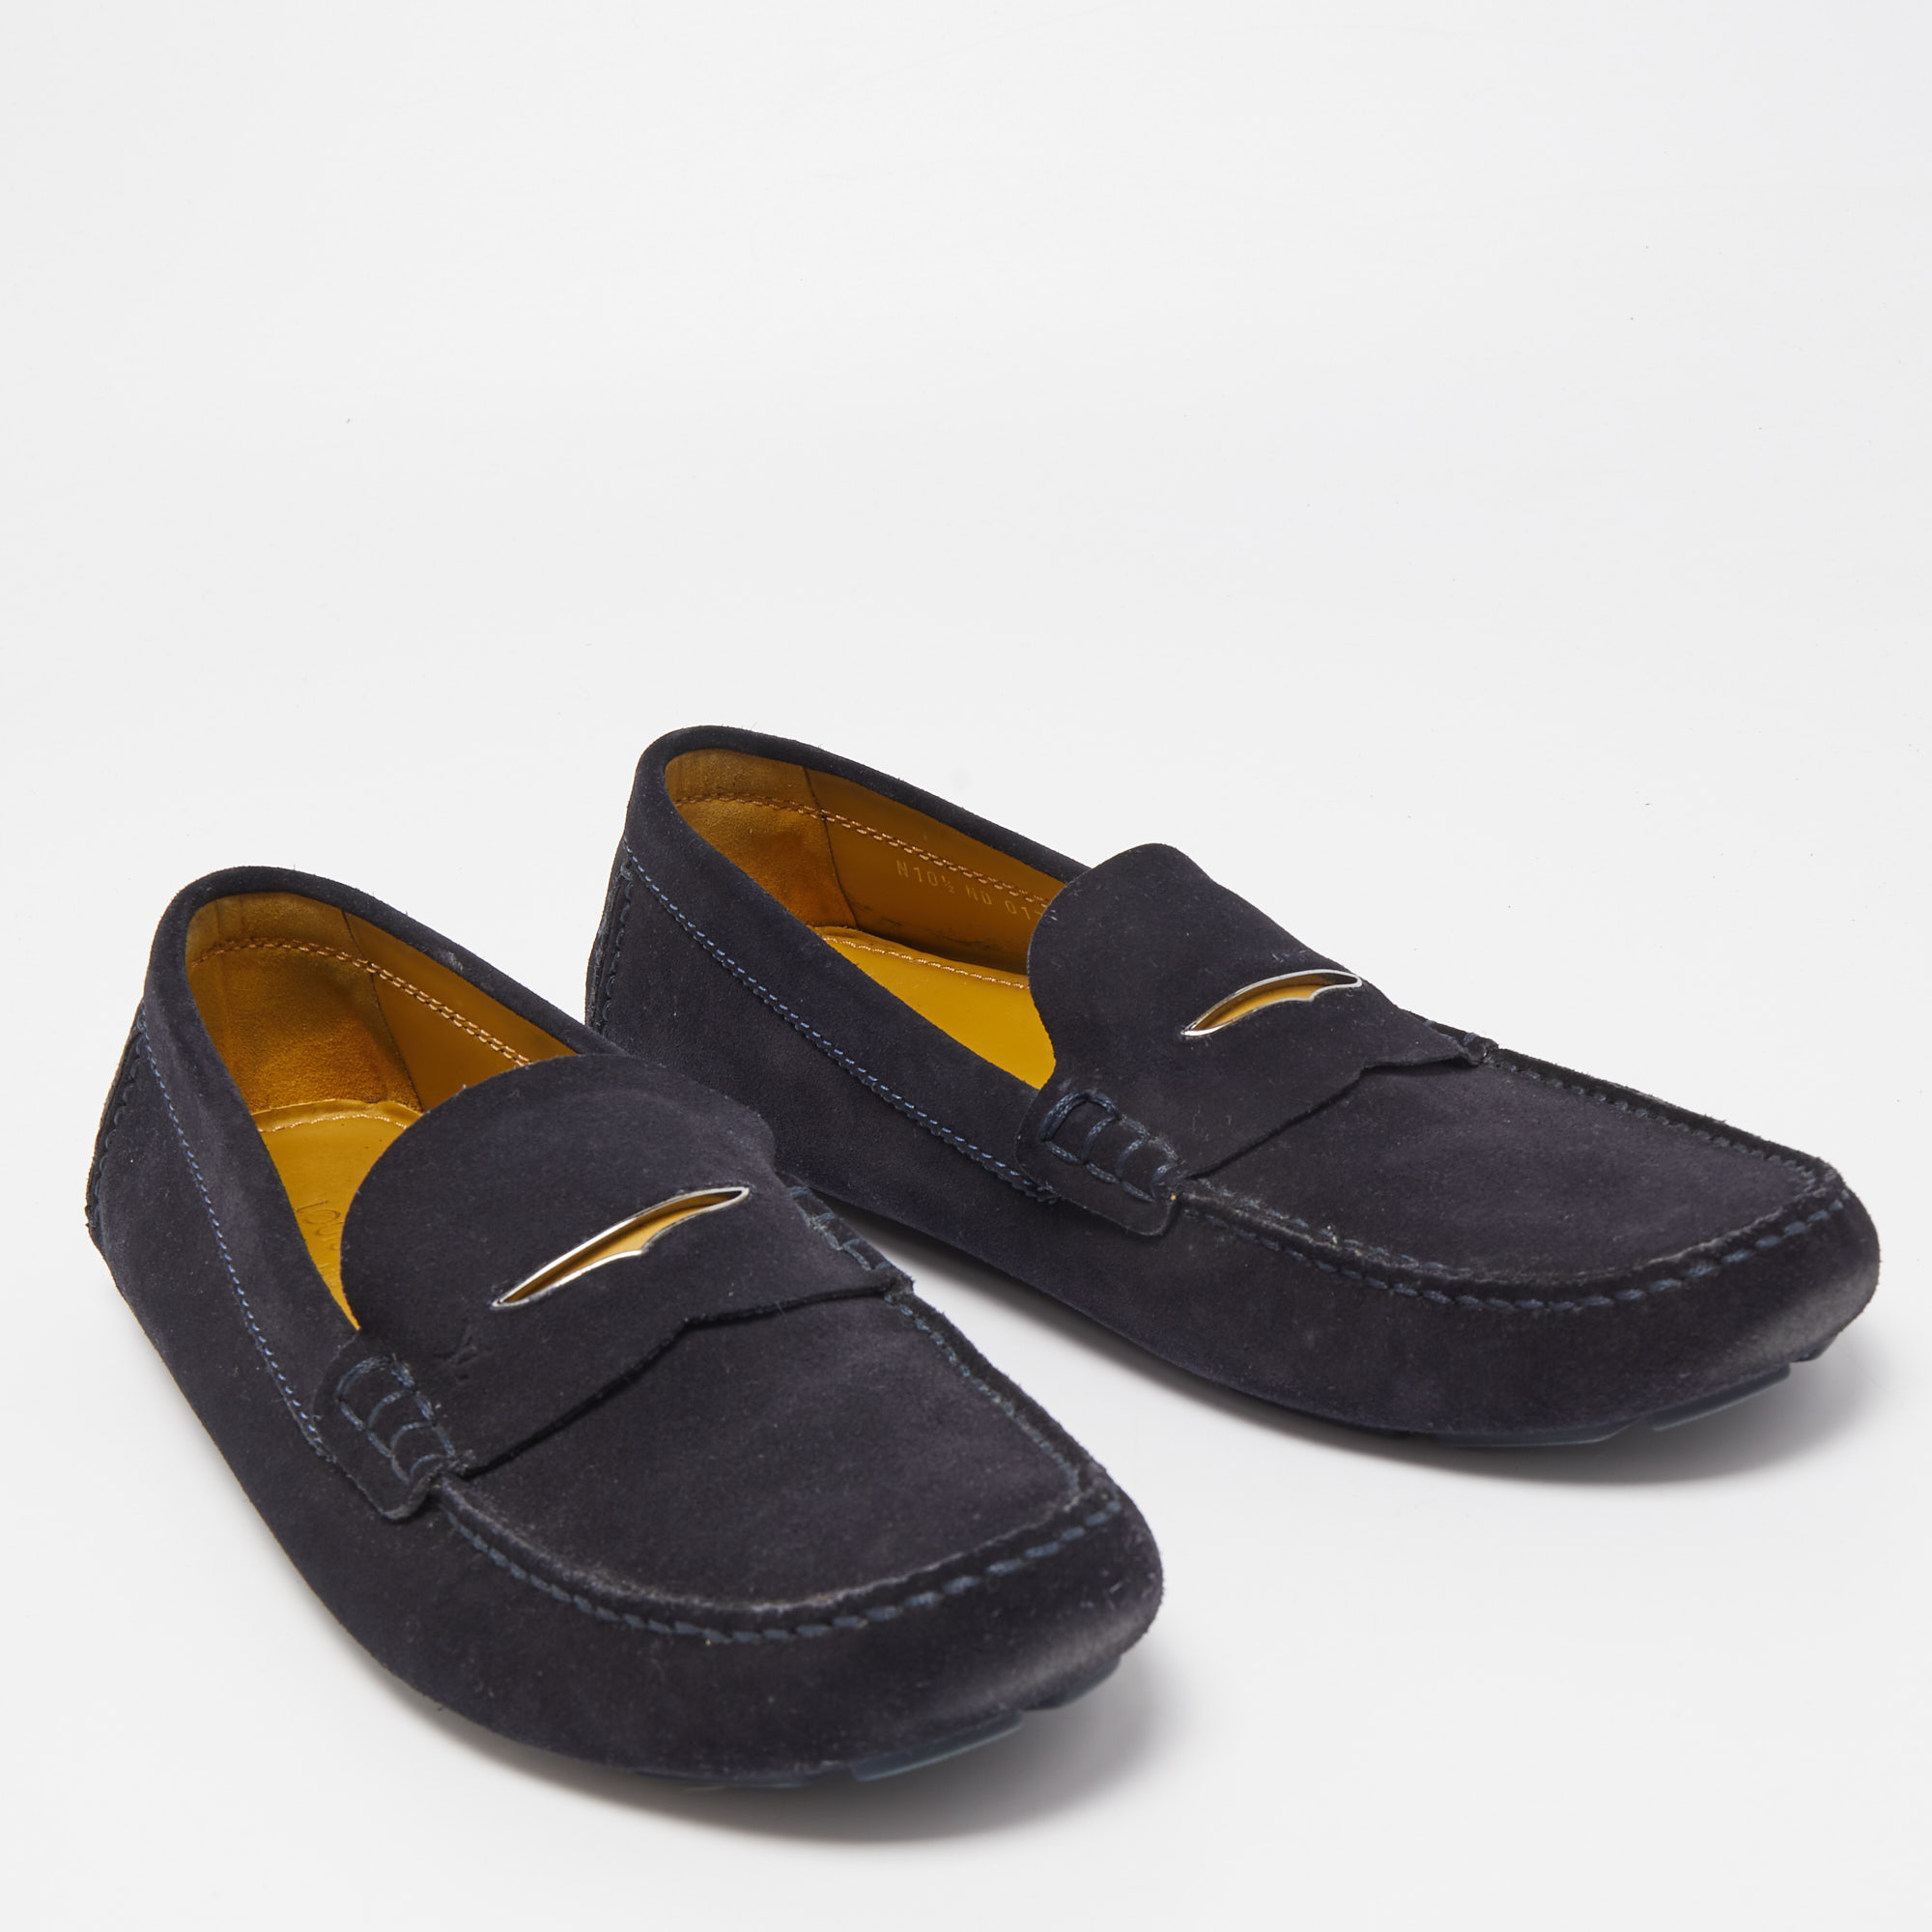 Louis Vuitton Navy Blue Suede Slip On Loafers Size 44.5